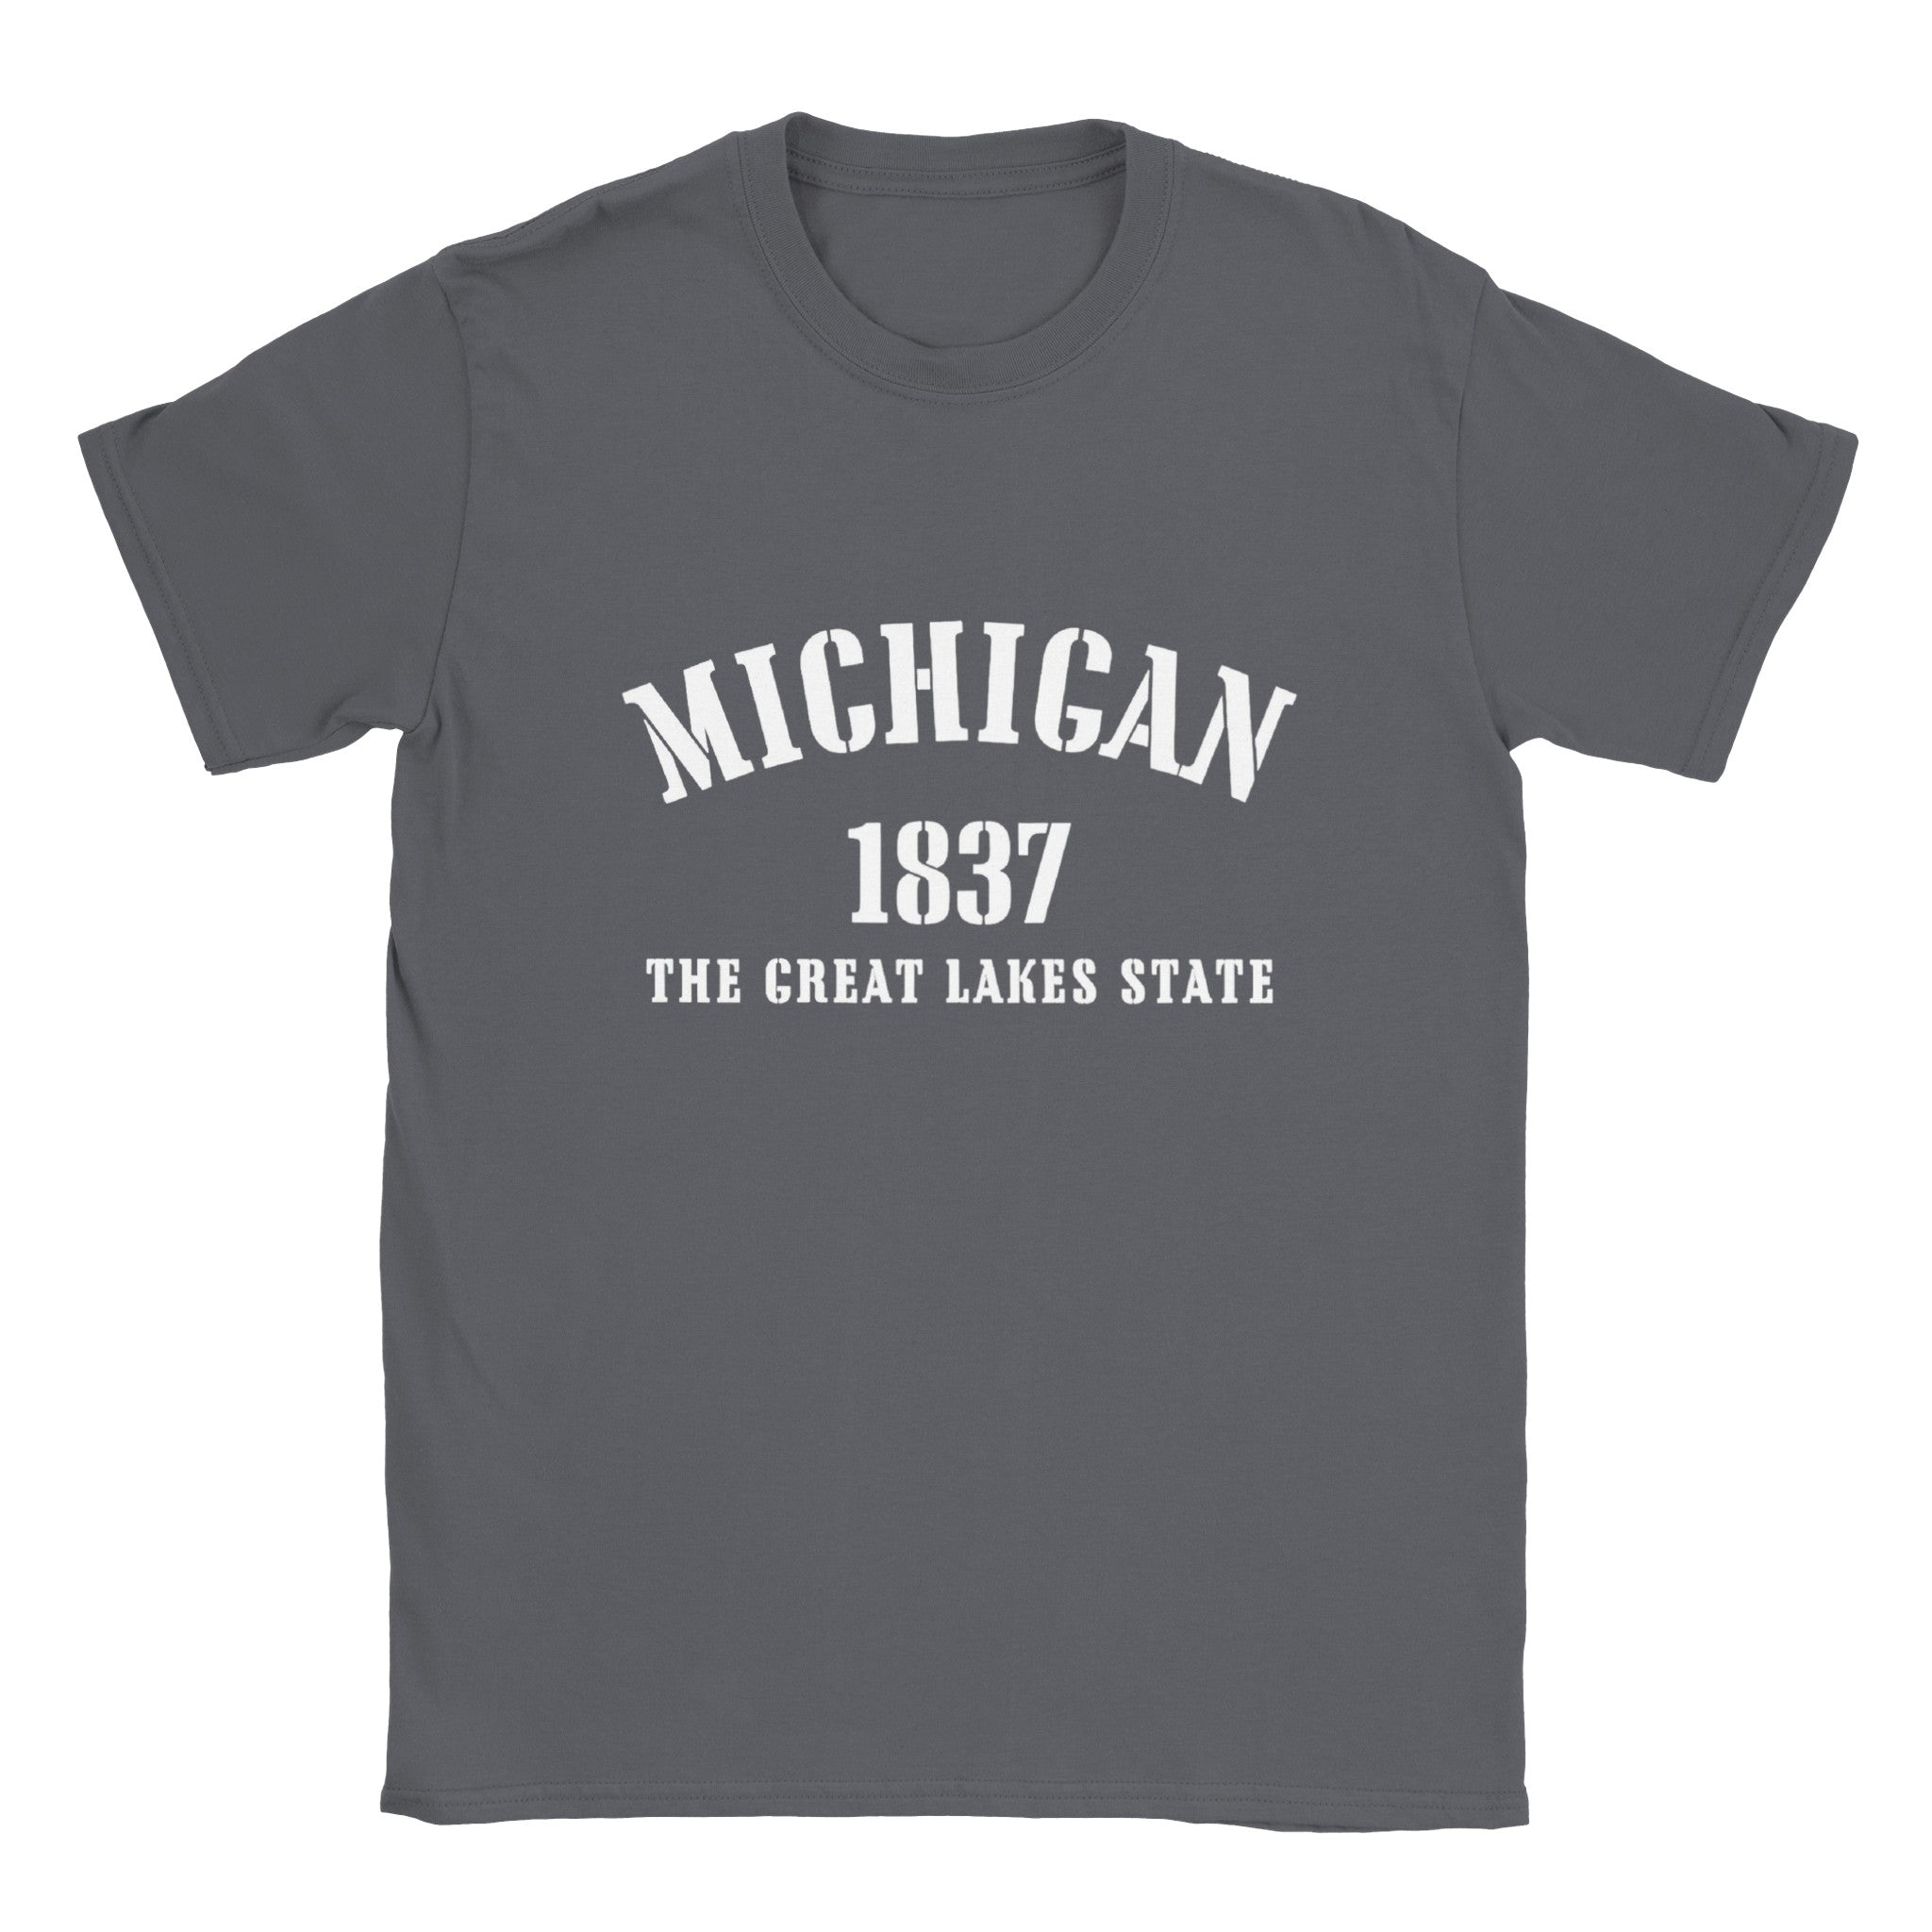 Michigan- Classic Unisex Crewneck States T-shirt - Creations by Chris and Carlos